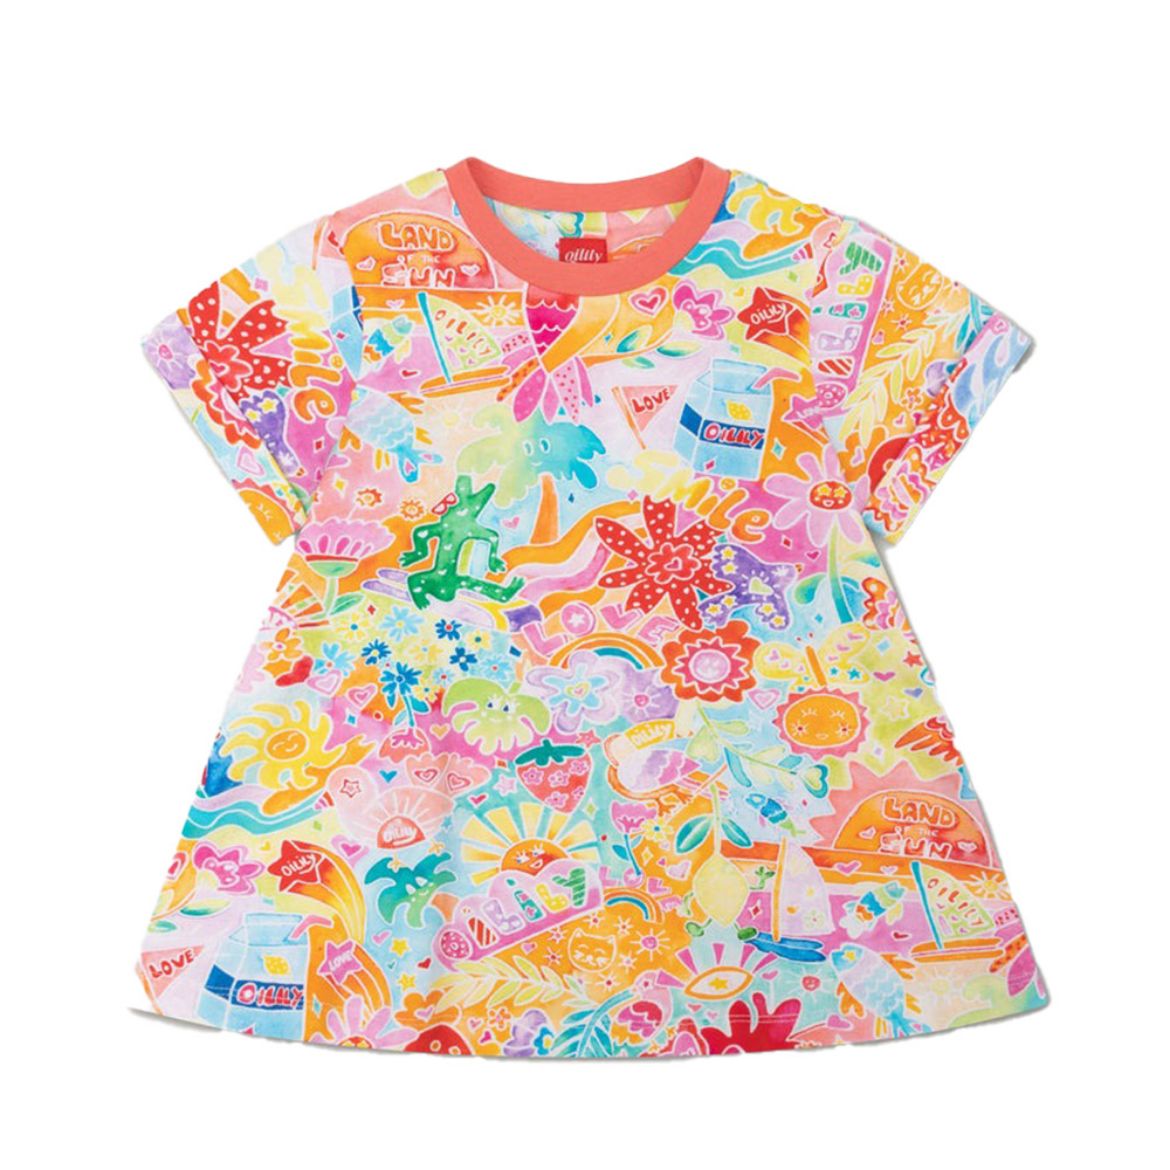 Picture of Oilily Girls Datje Sun Printed Dress